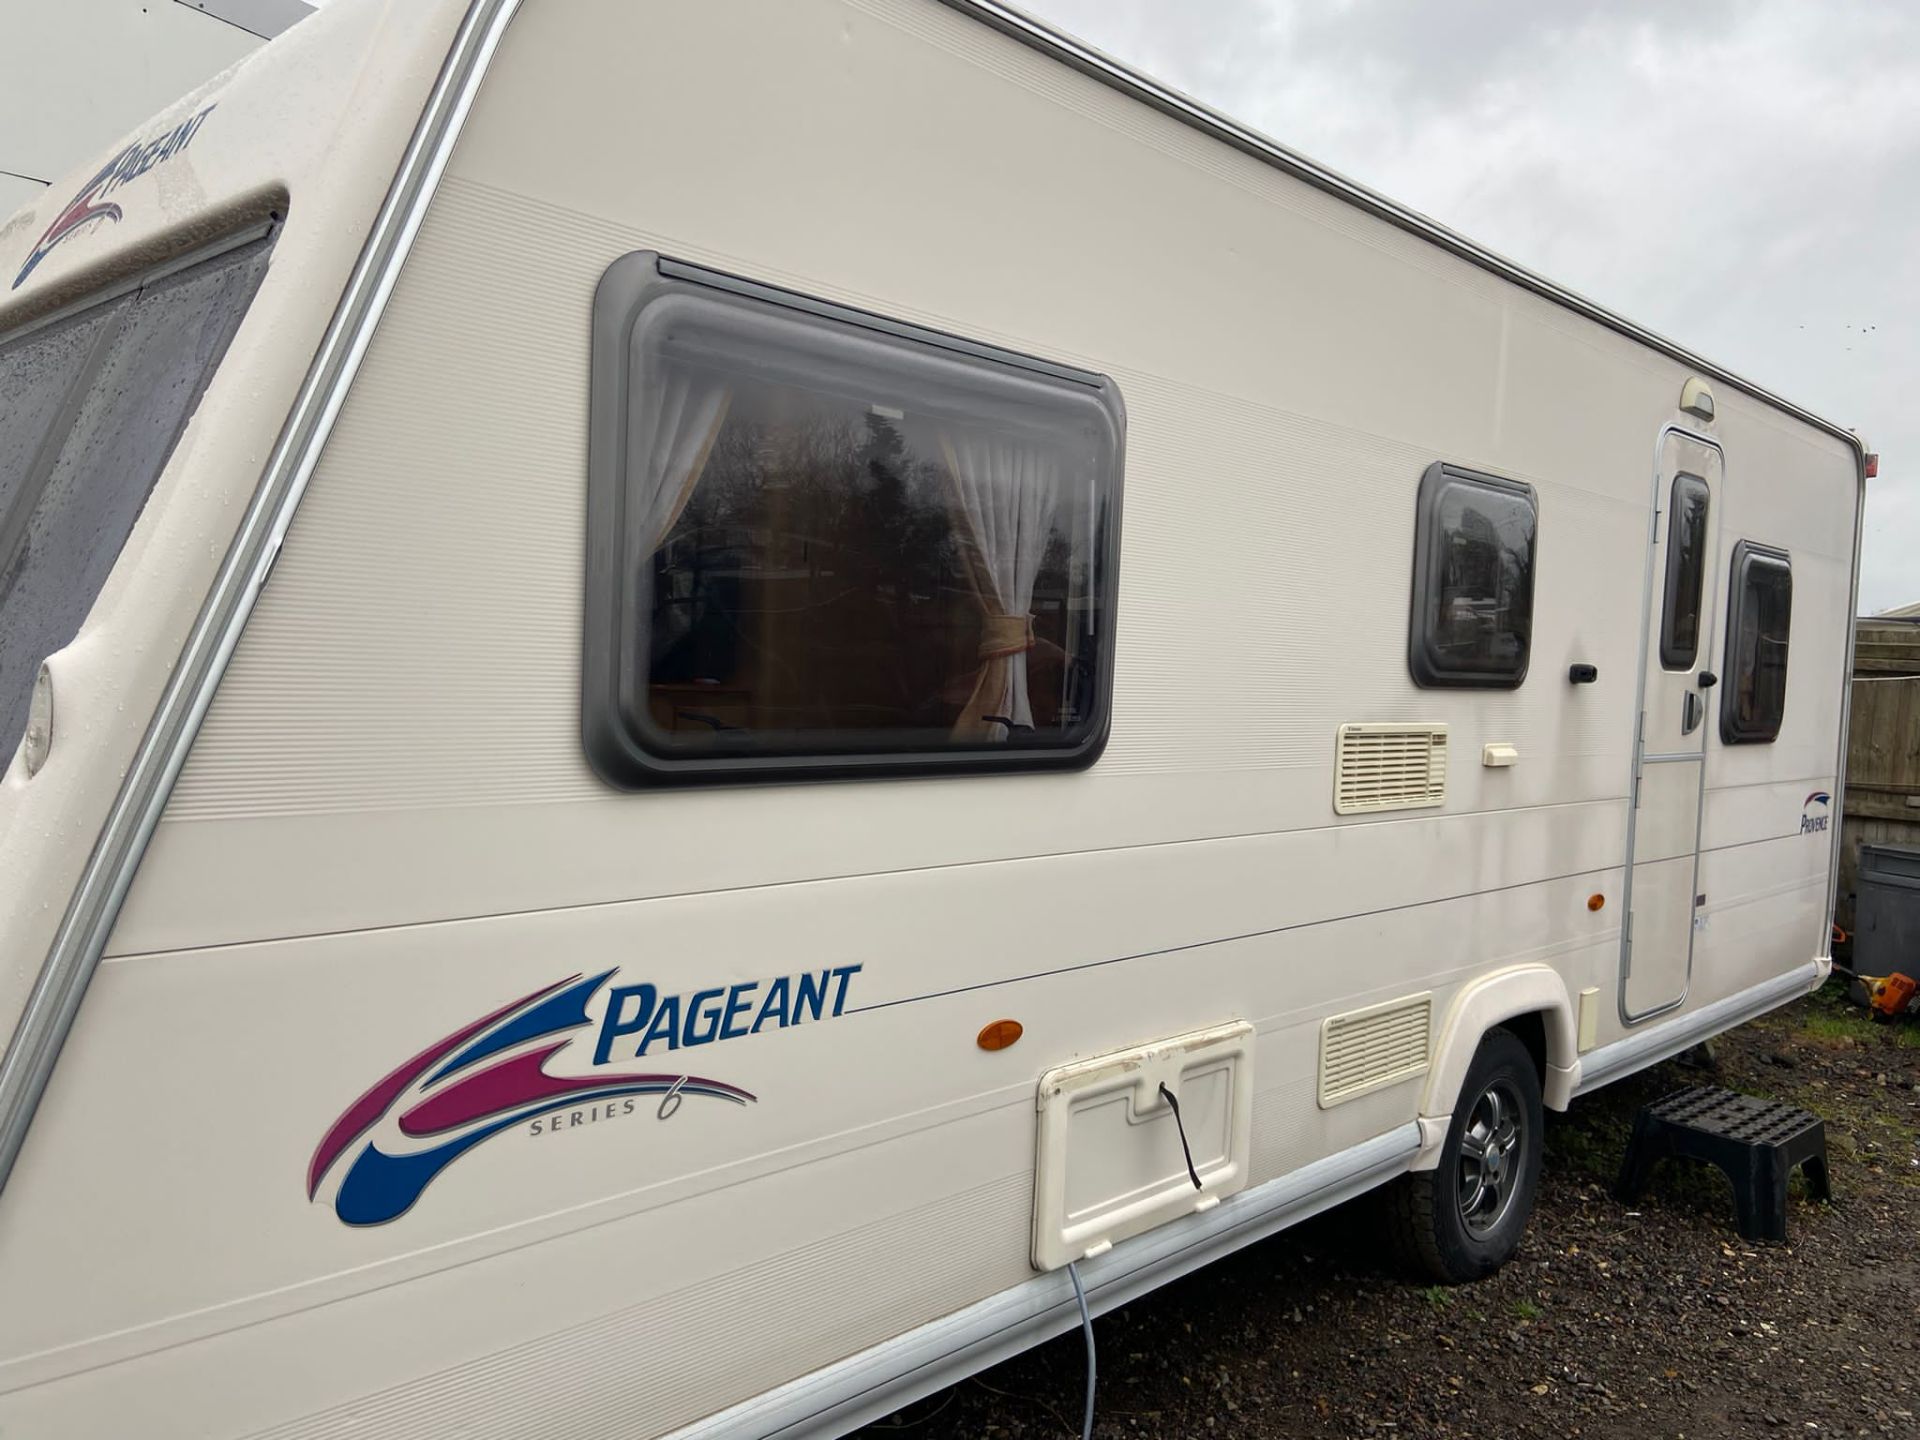 ** ON SALE ** Bailey Pageant series 6 - 4 Berth - '2007 Year' Middle Bathroom - No Vat - Image 2 of 11